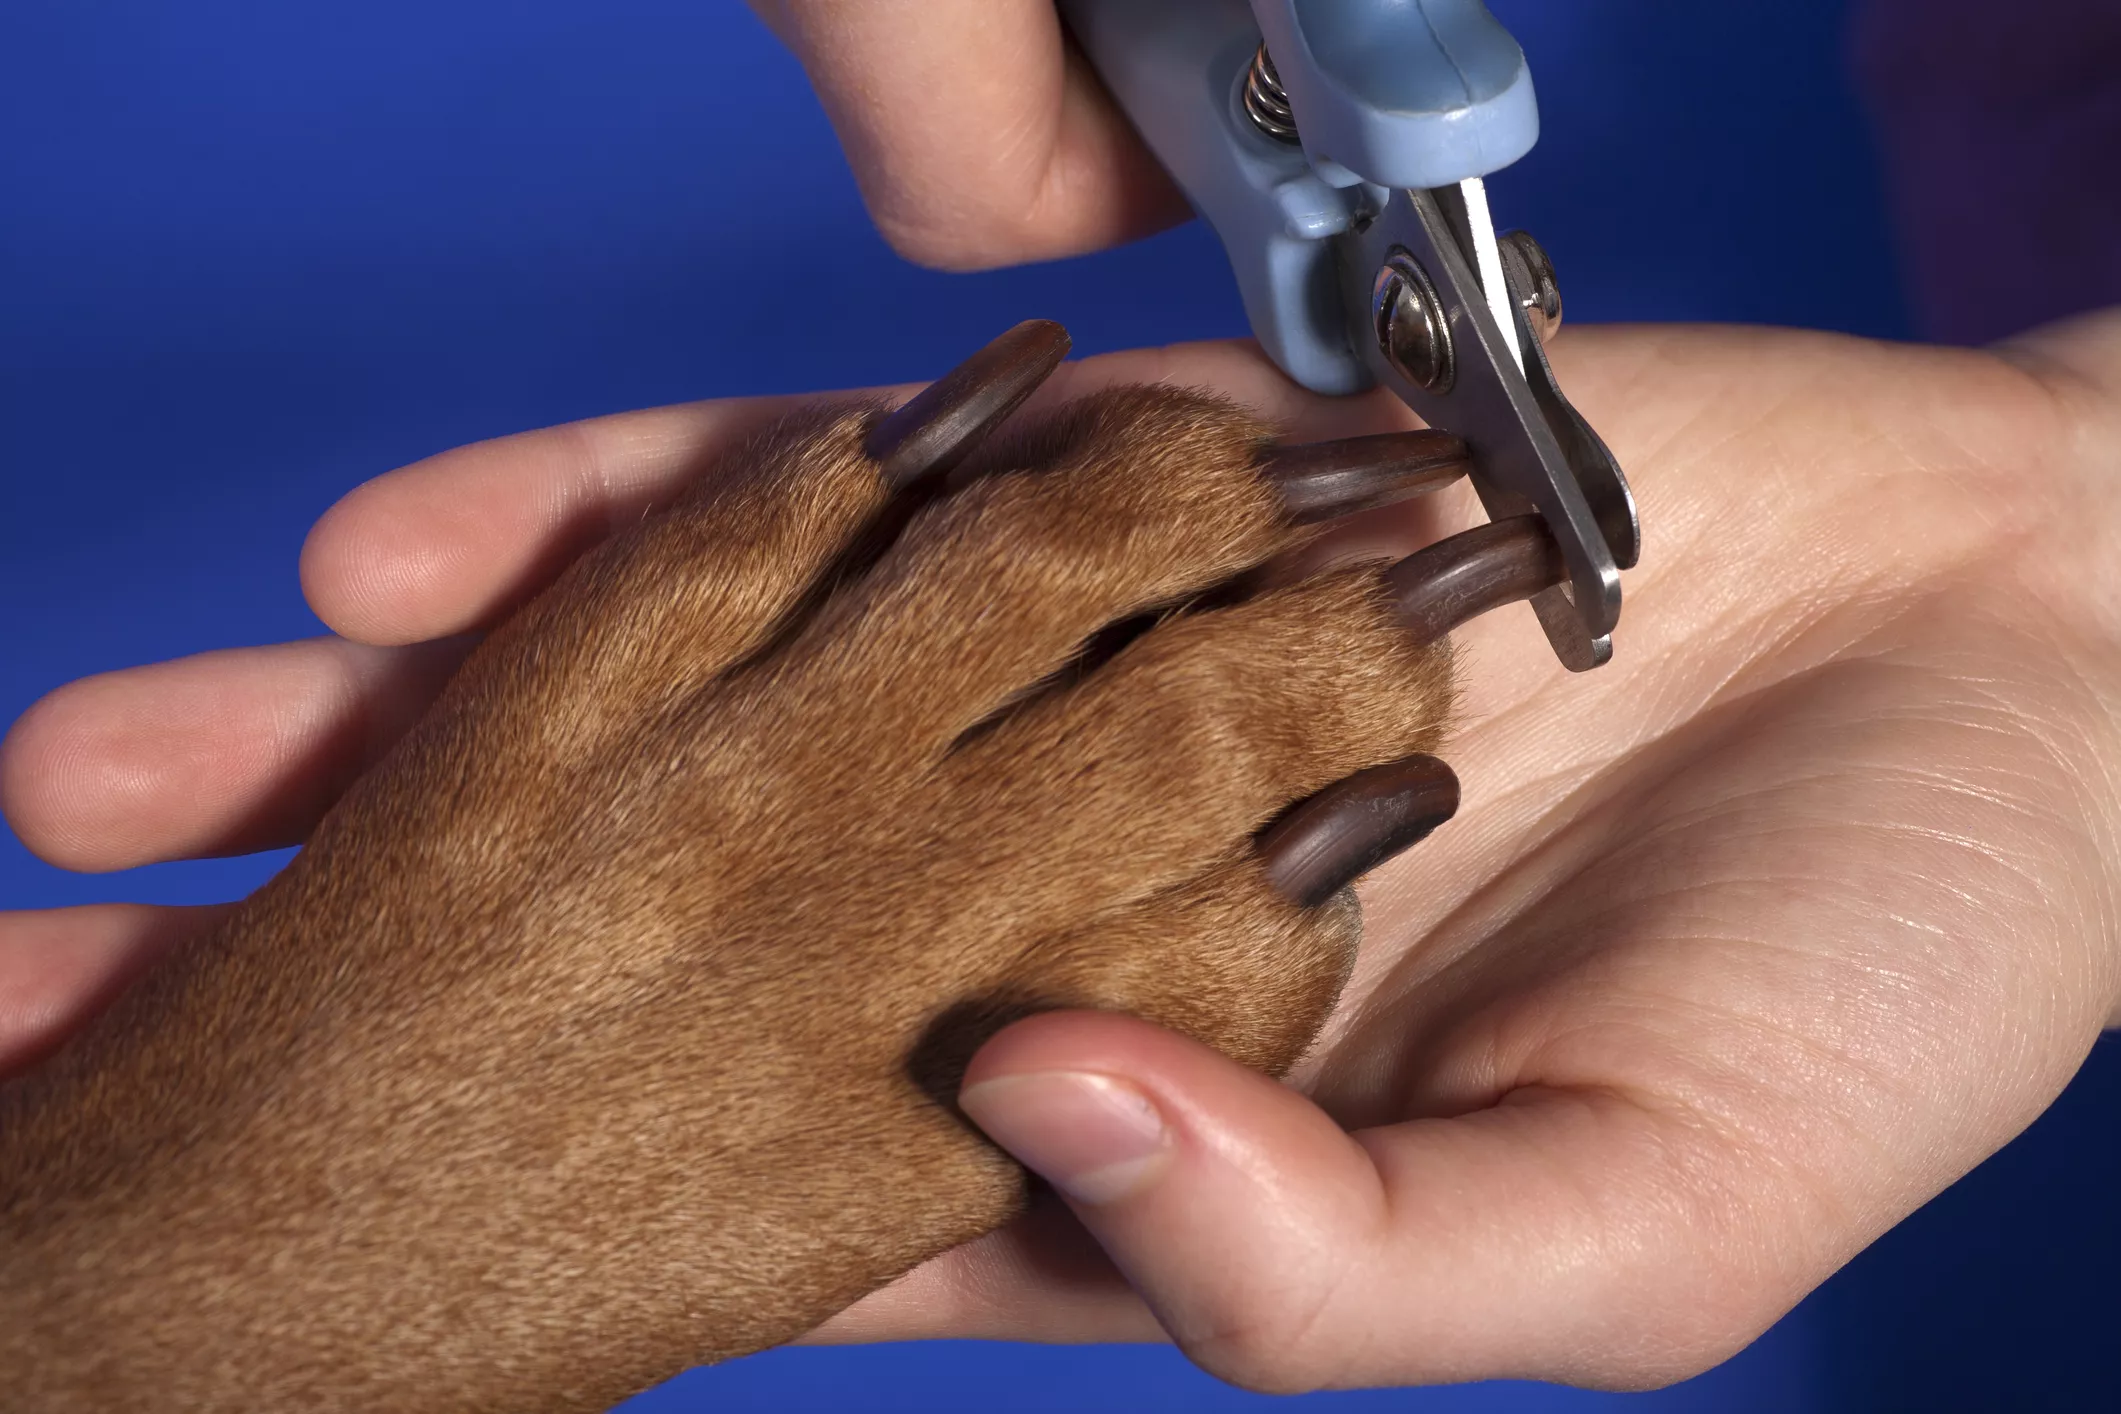 How to Trim Dog Nails - The RIGHT Way - YouTube